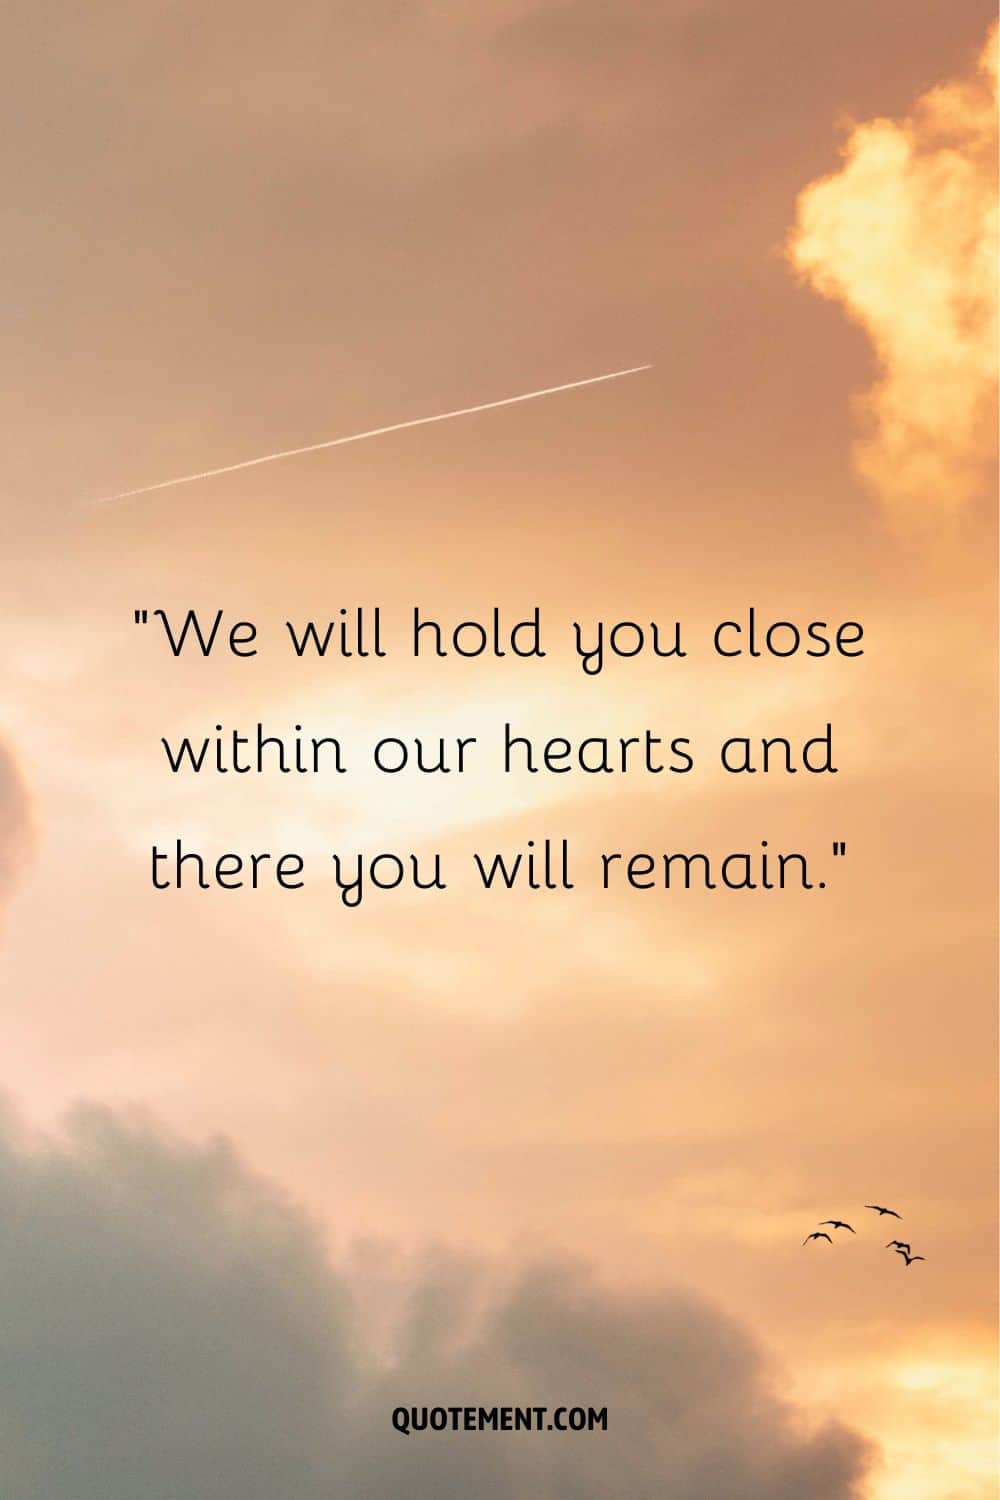 We will hold you close within our hearts and there you will remain.